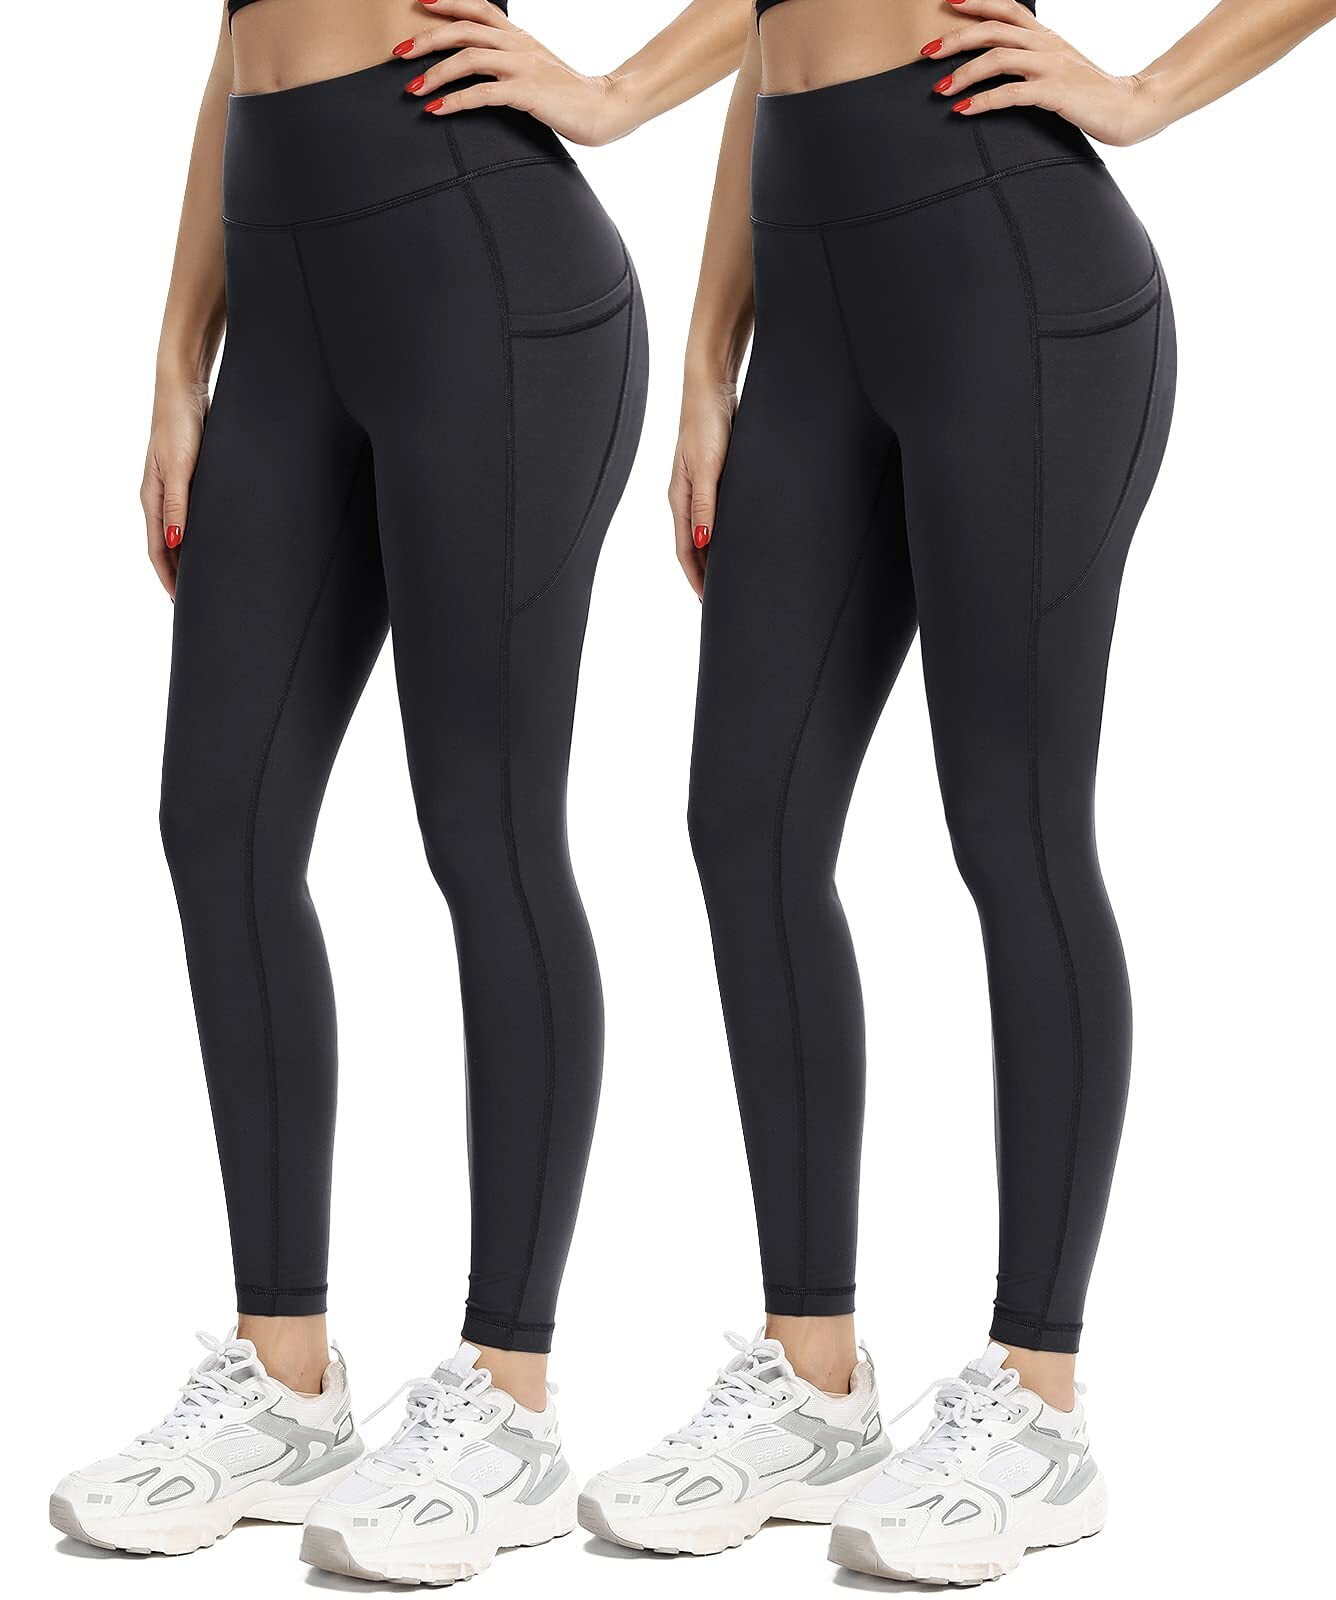 UMINEUX Yoga Pants for Women, 7/8 High Waist Leggings with Pockets 2 Pack  (Small, Gray + Black) 